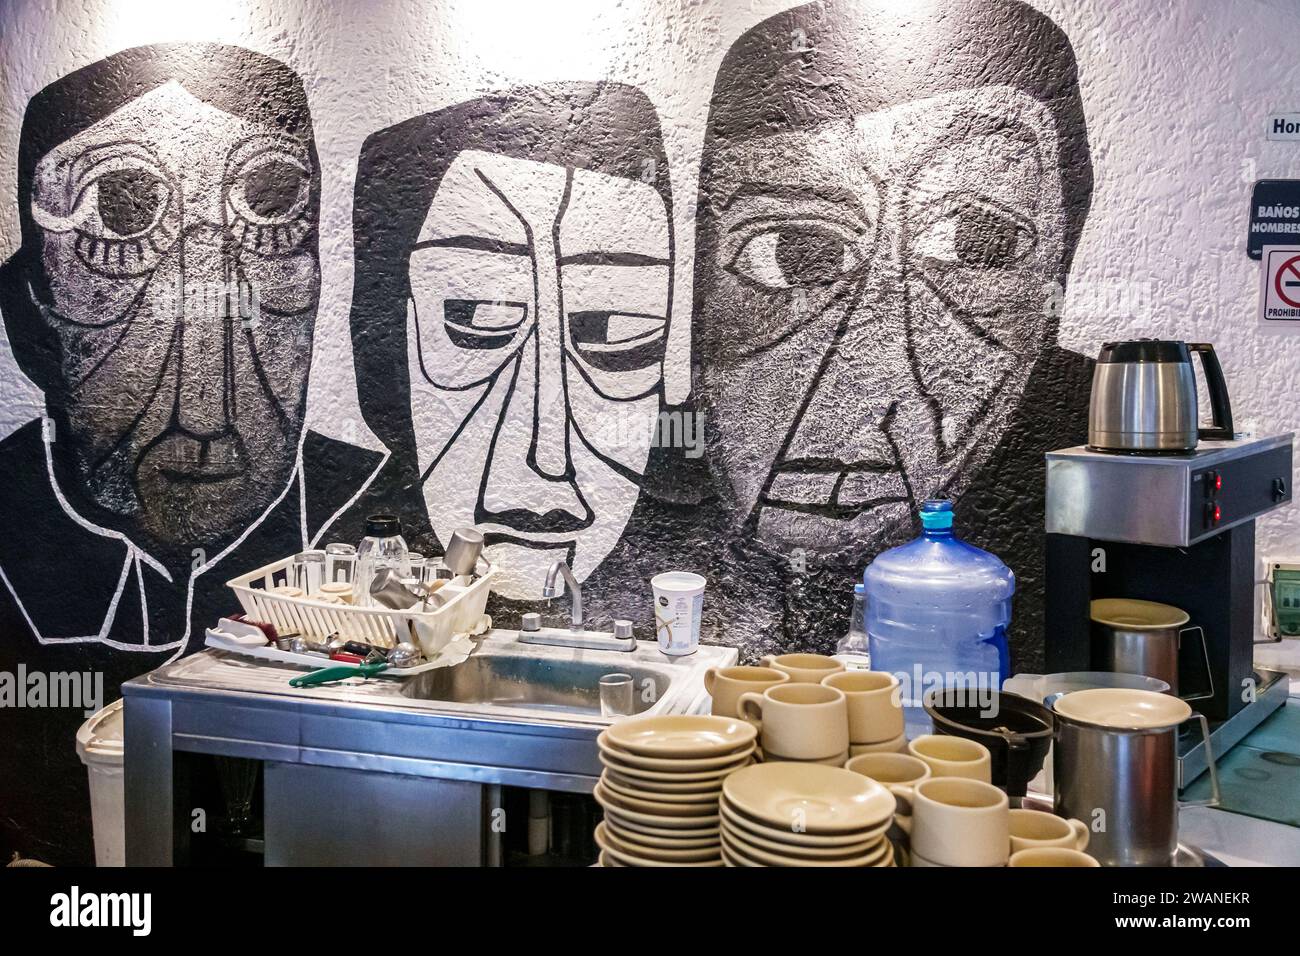 Merida Mexico,centro historico central historic district,mural kitchen stacked dishes sink,inside interior indoors,restaurant dine dining eating out,c Stock Photo